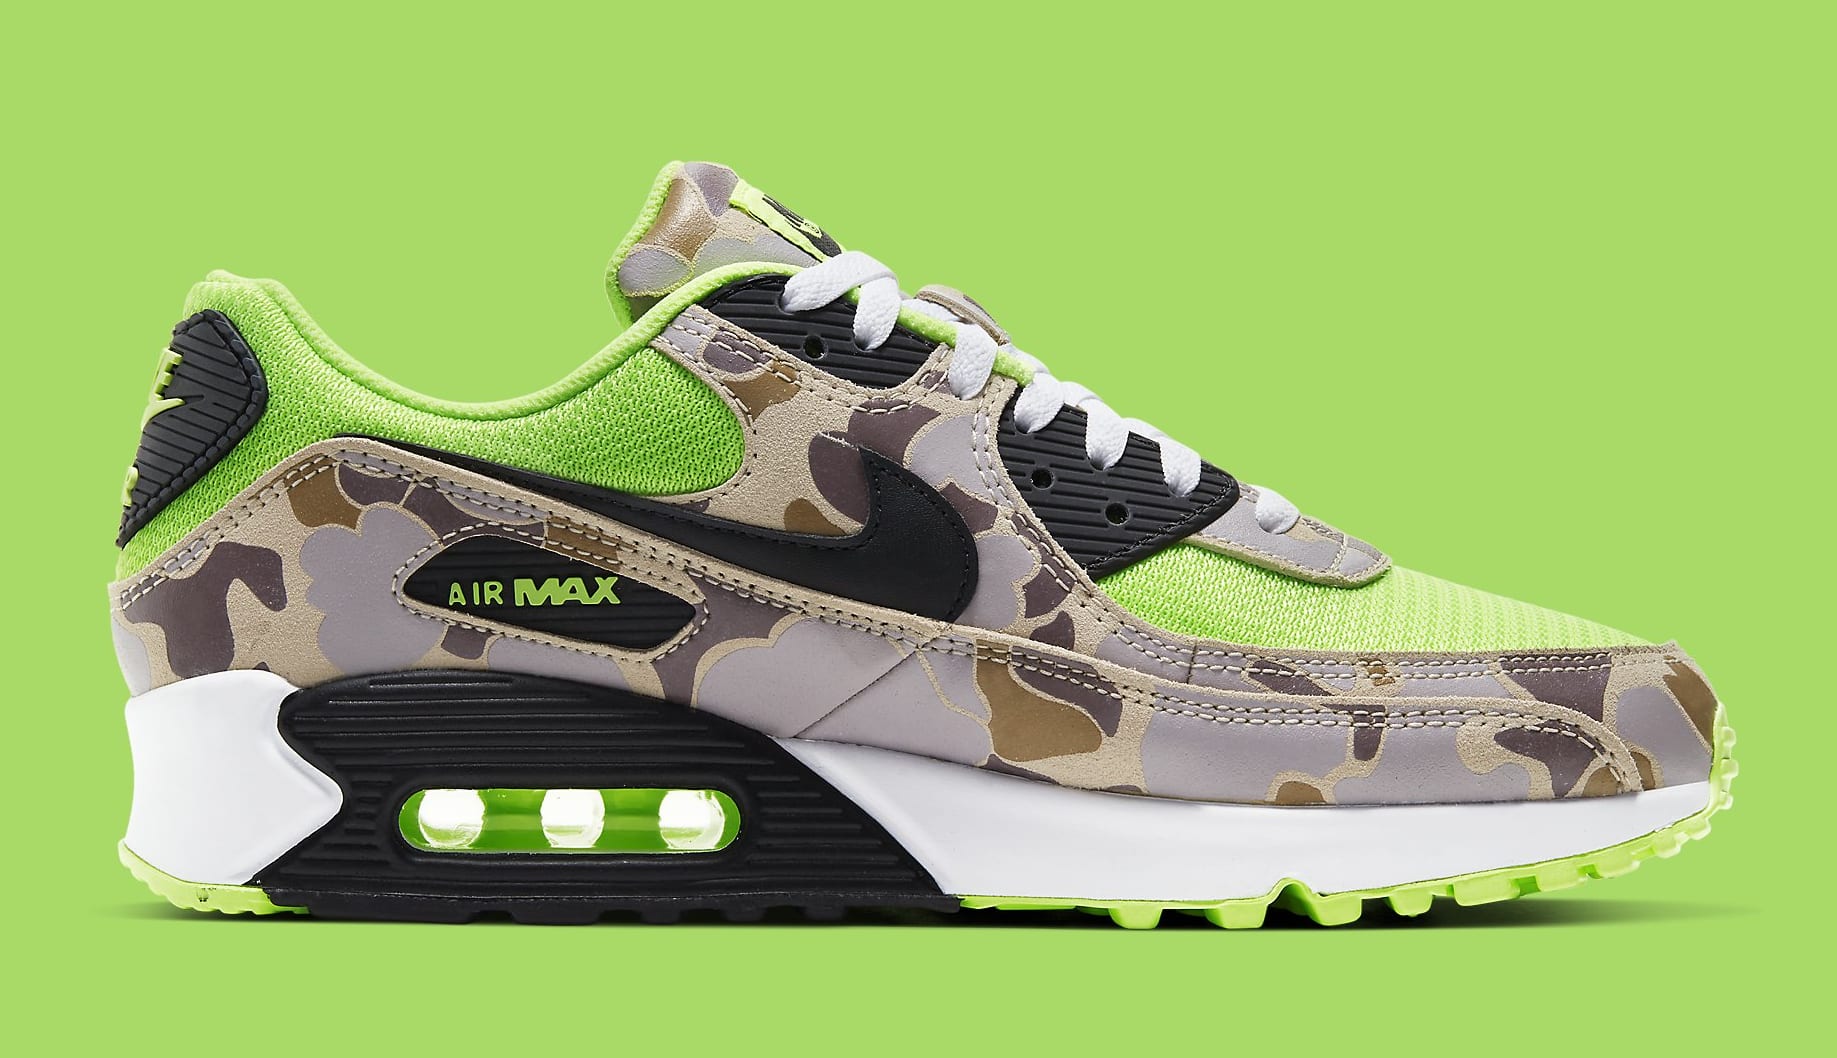 Nike Air Max 90 Volt Duck Camo Ghost Green Release Date CW4039-300 Profile Right